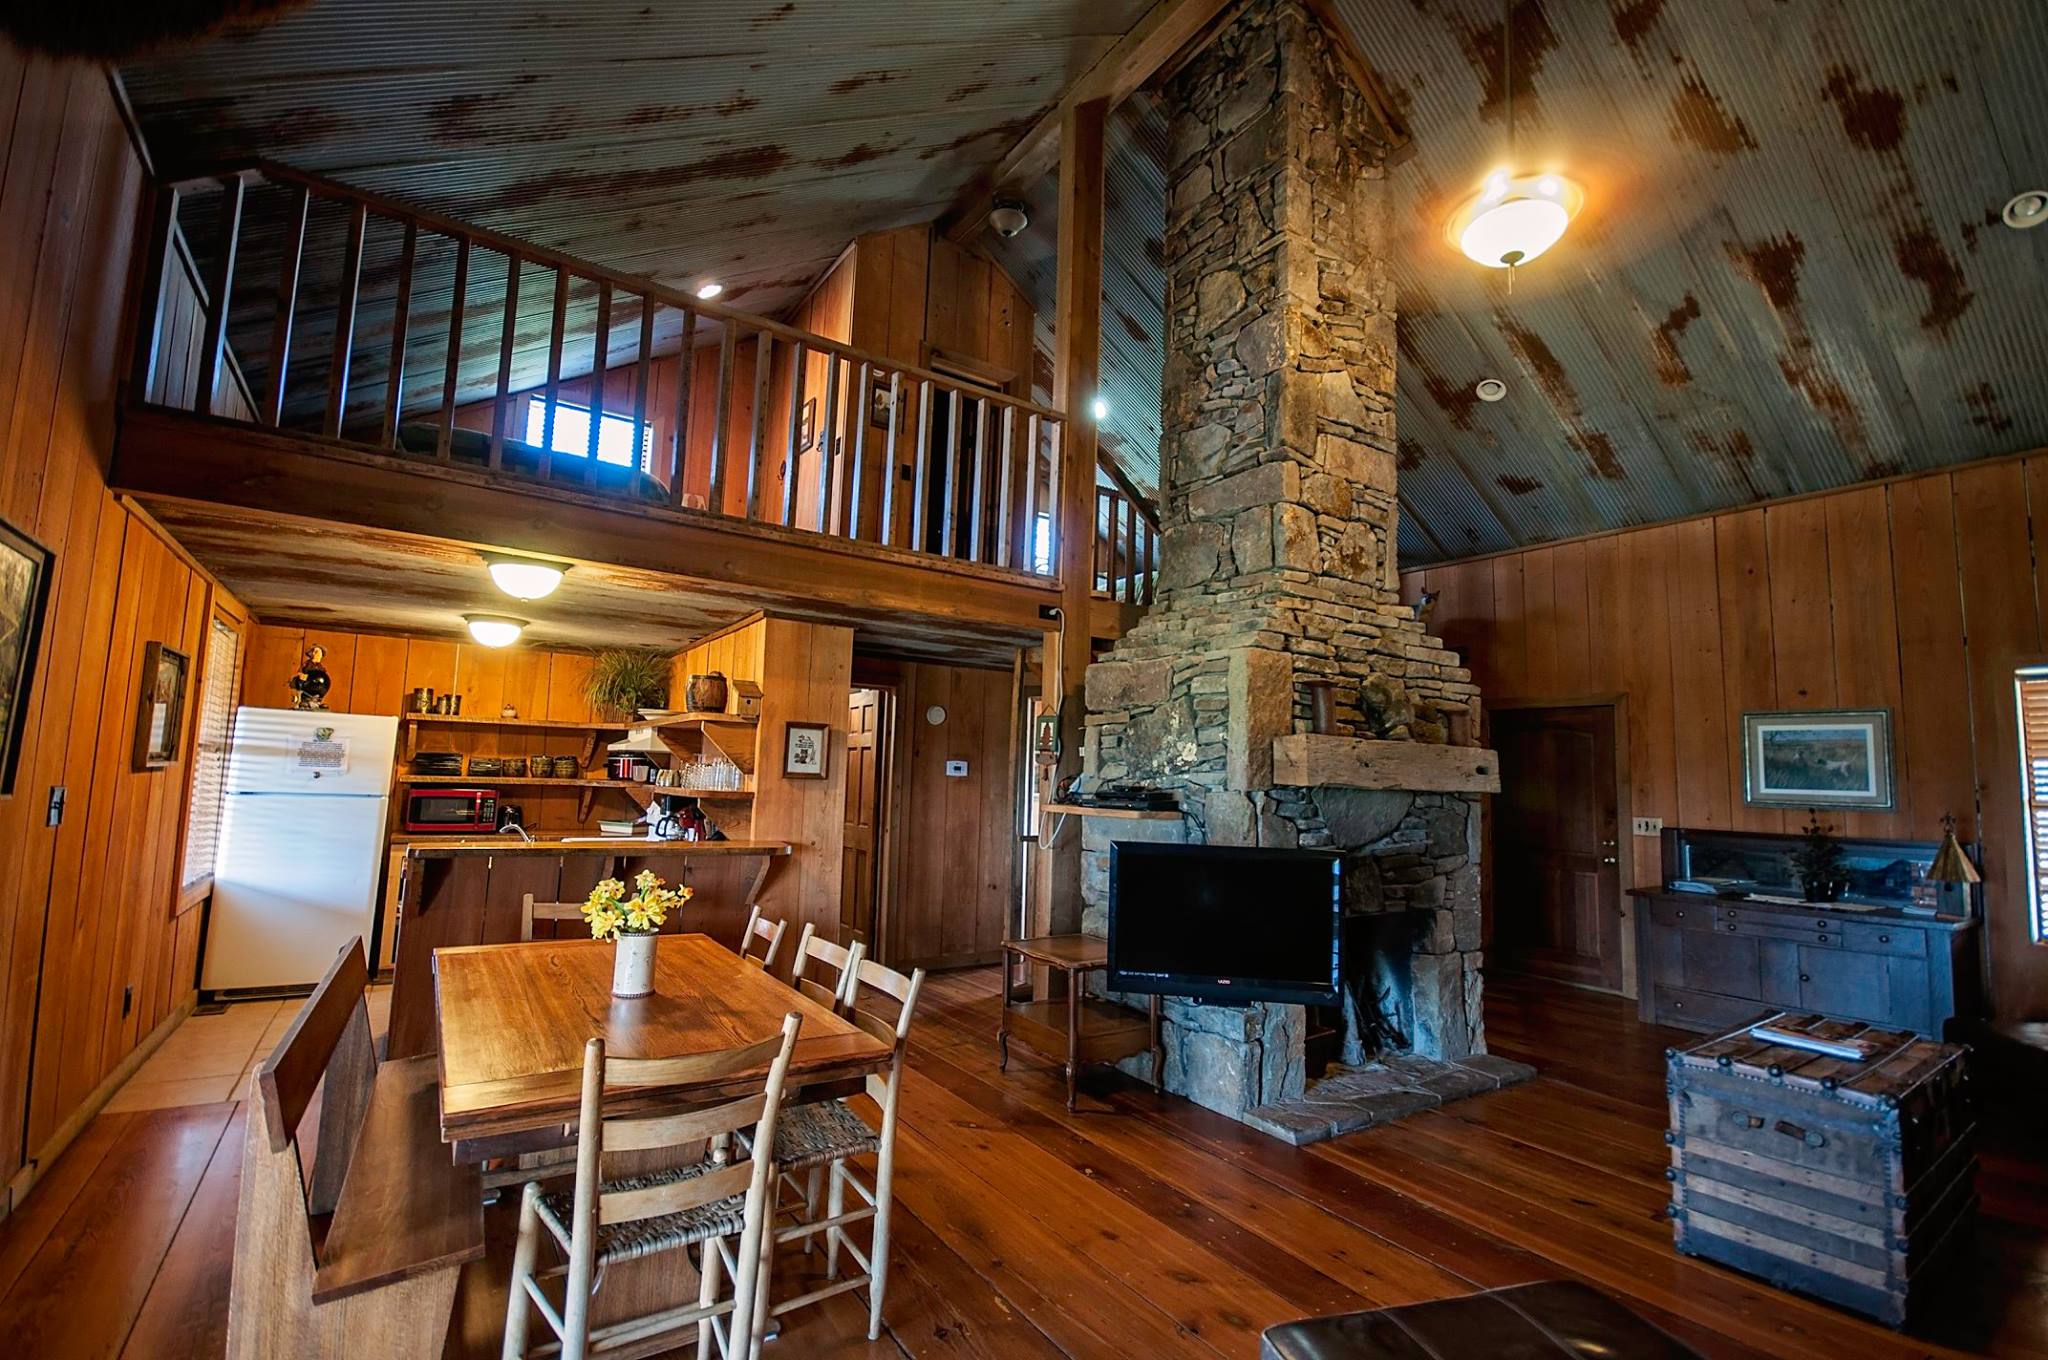 Arkansas Ozarks rental cabin has fully equipped kitchen and spacious indoor/outdoor dining areas.